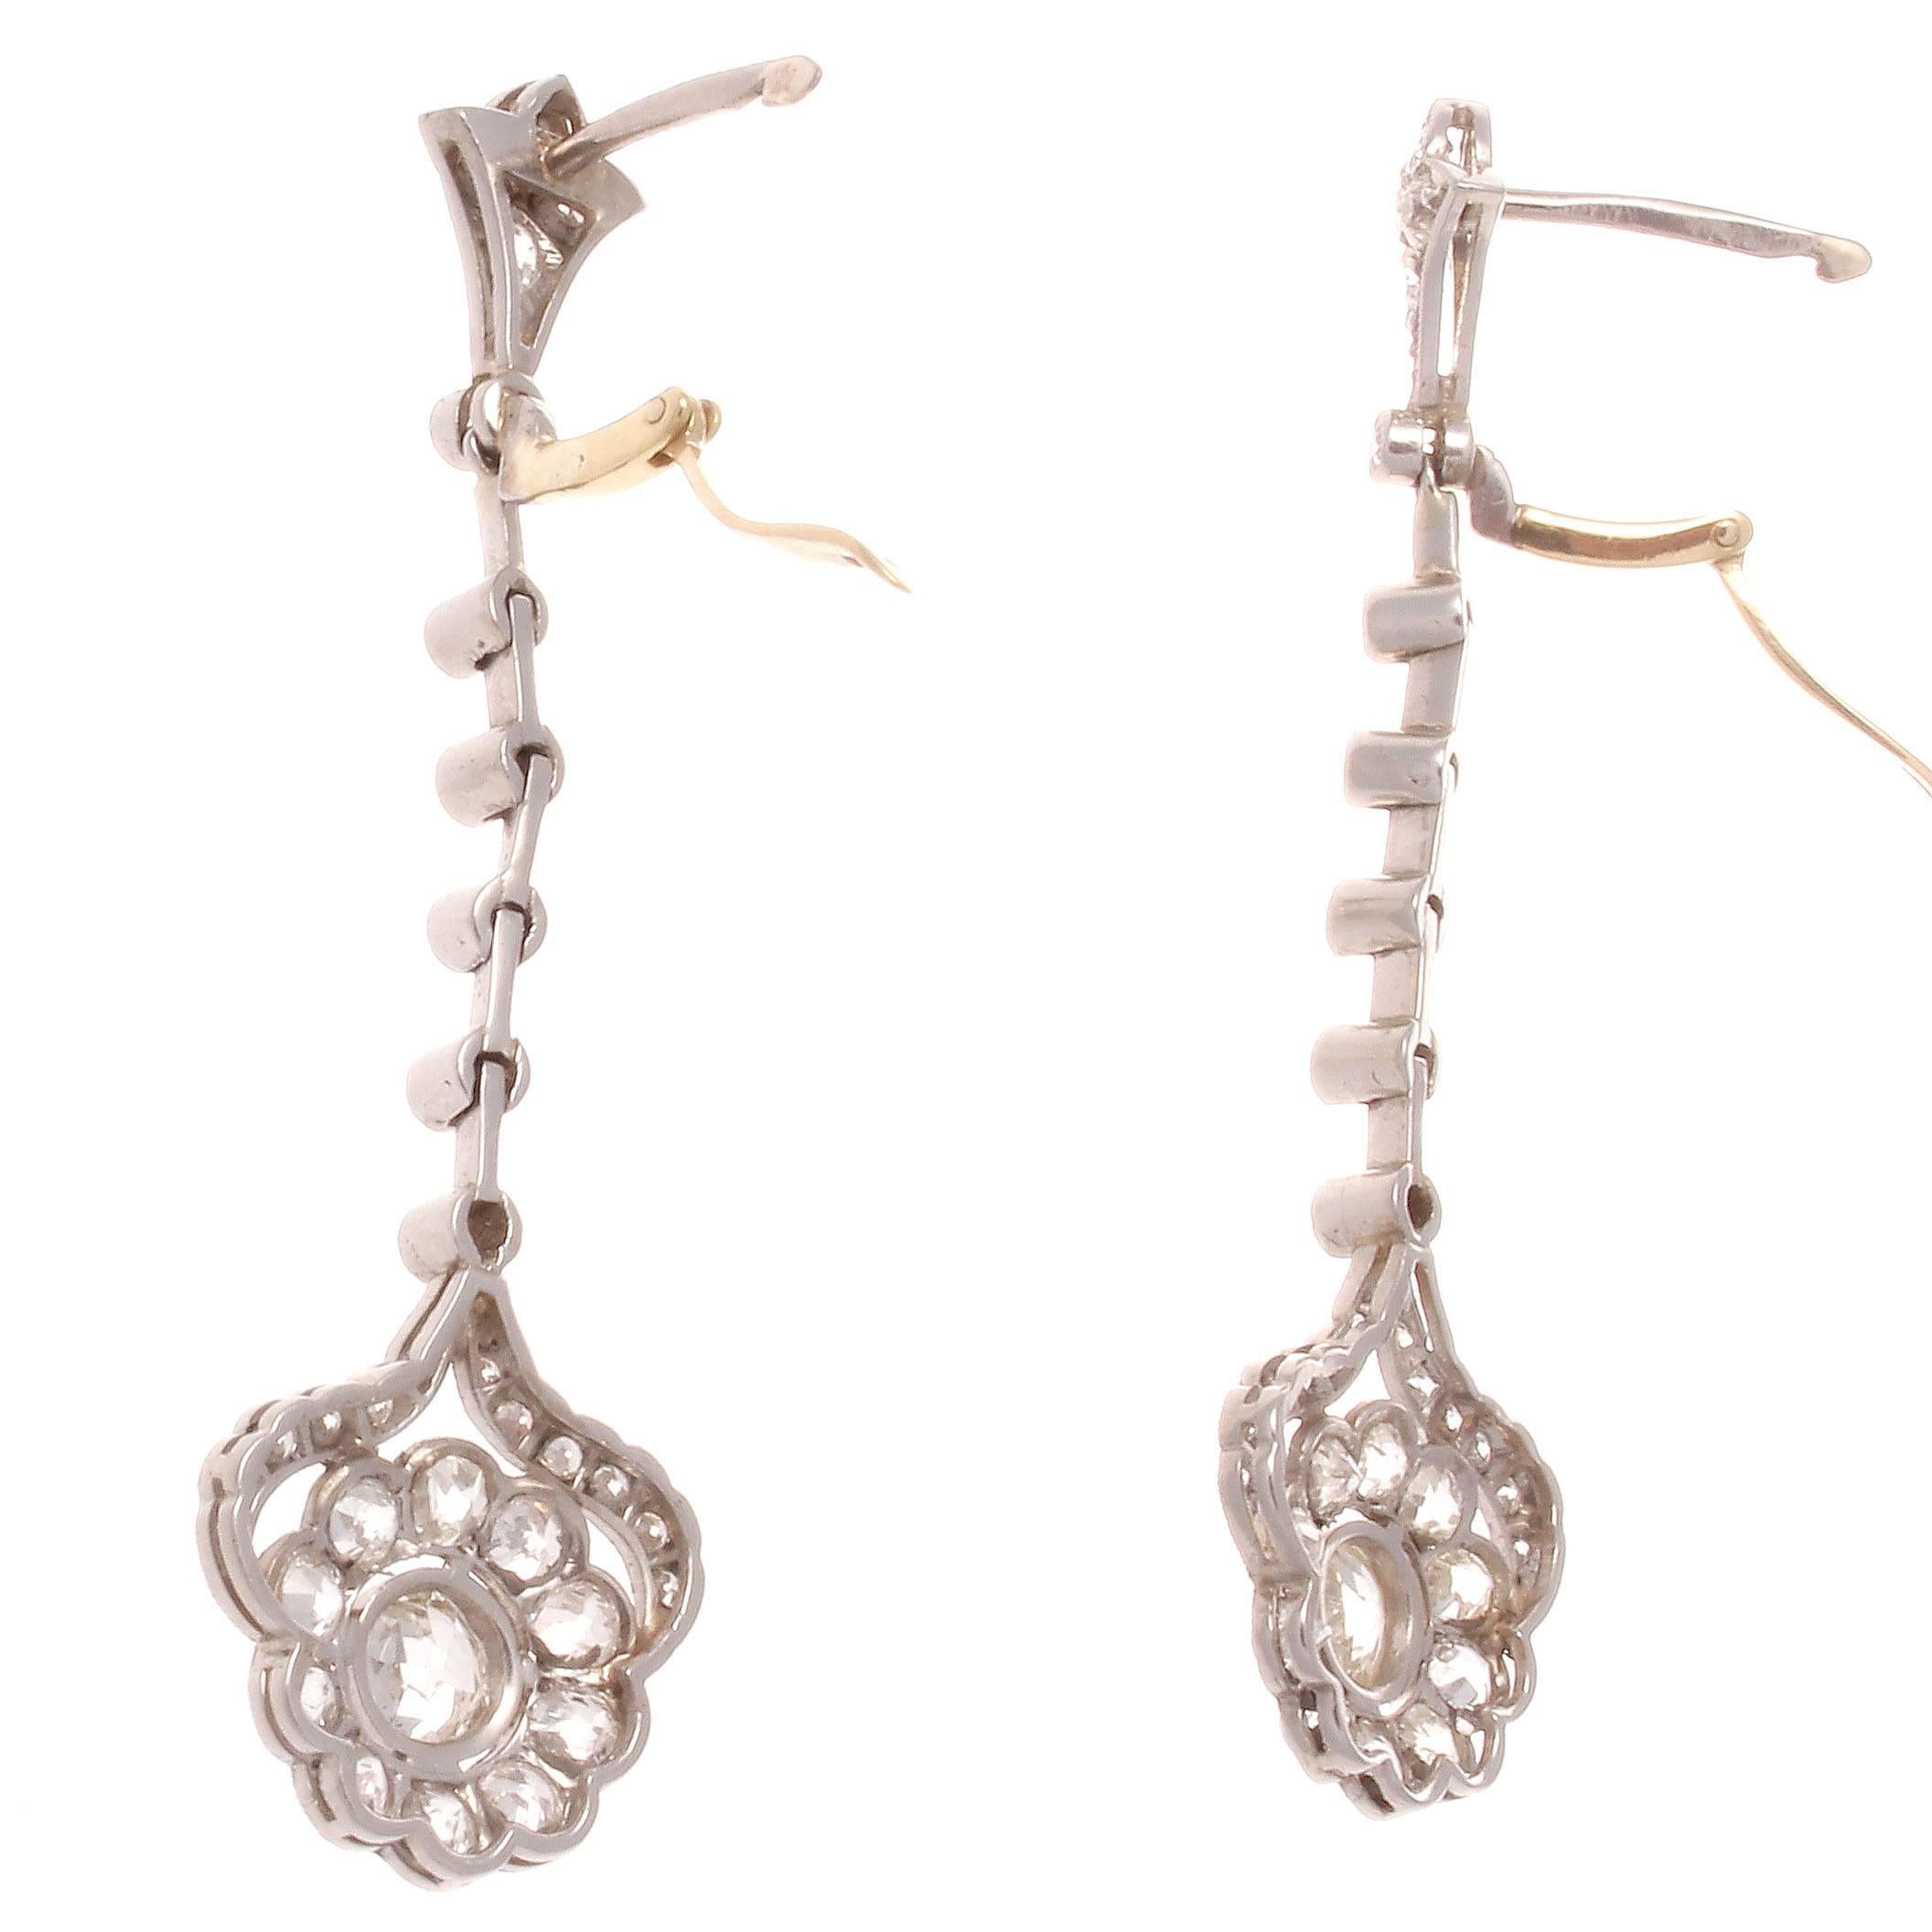 Inspired by one of the most influential periods of art and design. These earrings are hand crafted by a designer who specializes in creating art deco inspired pieces that emphasizes everything that was special about the 1930's. Featuring numerous